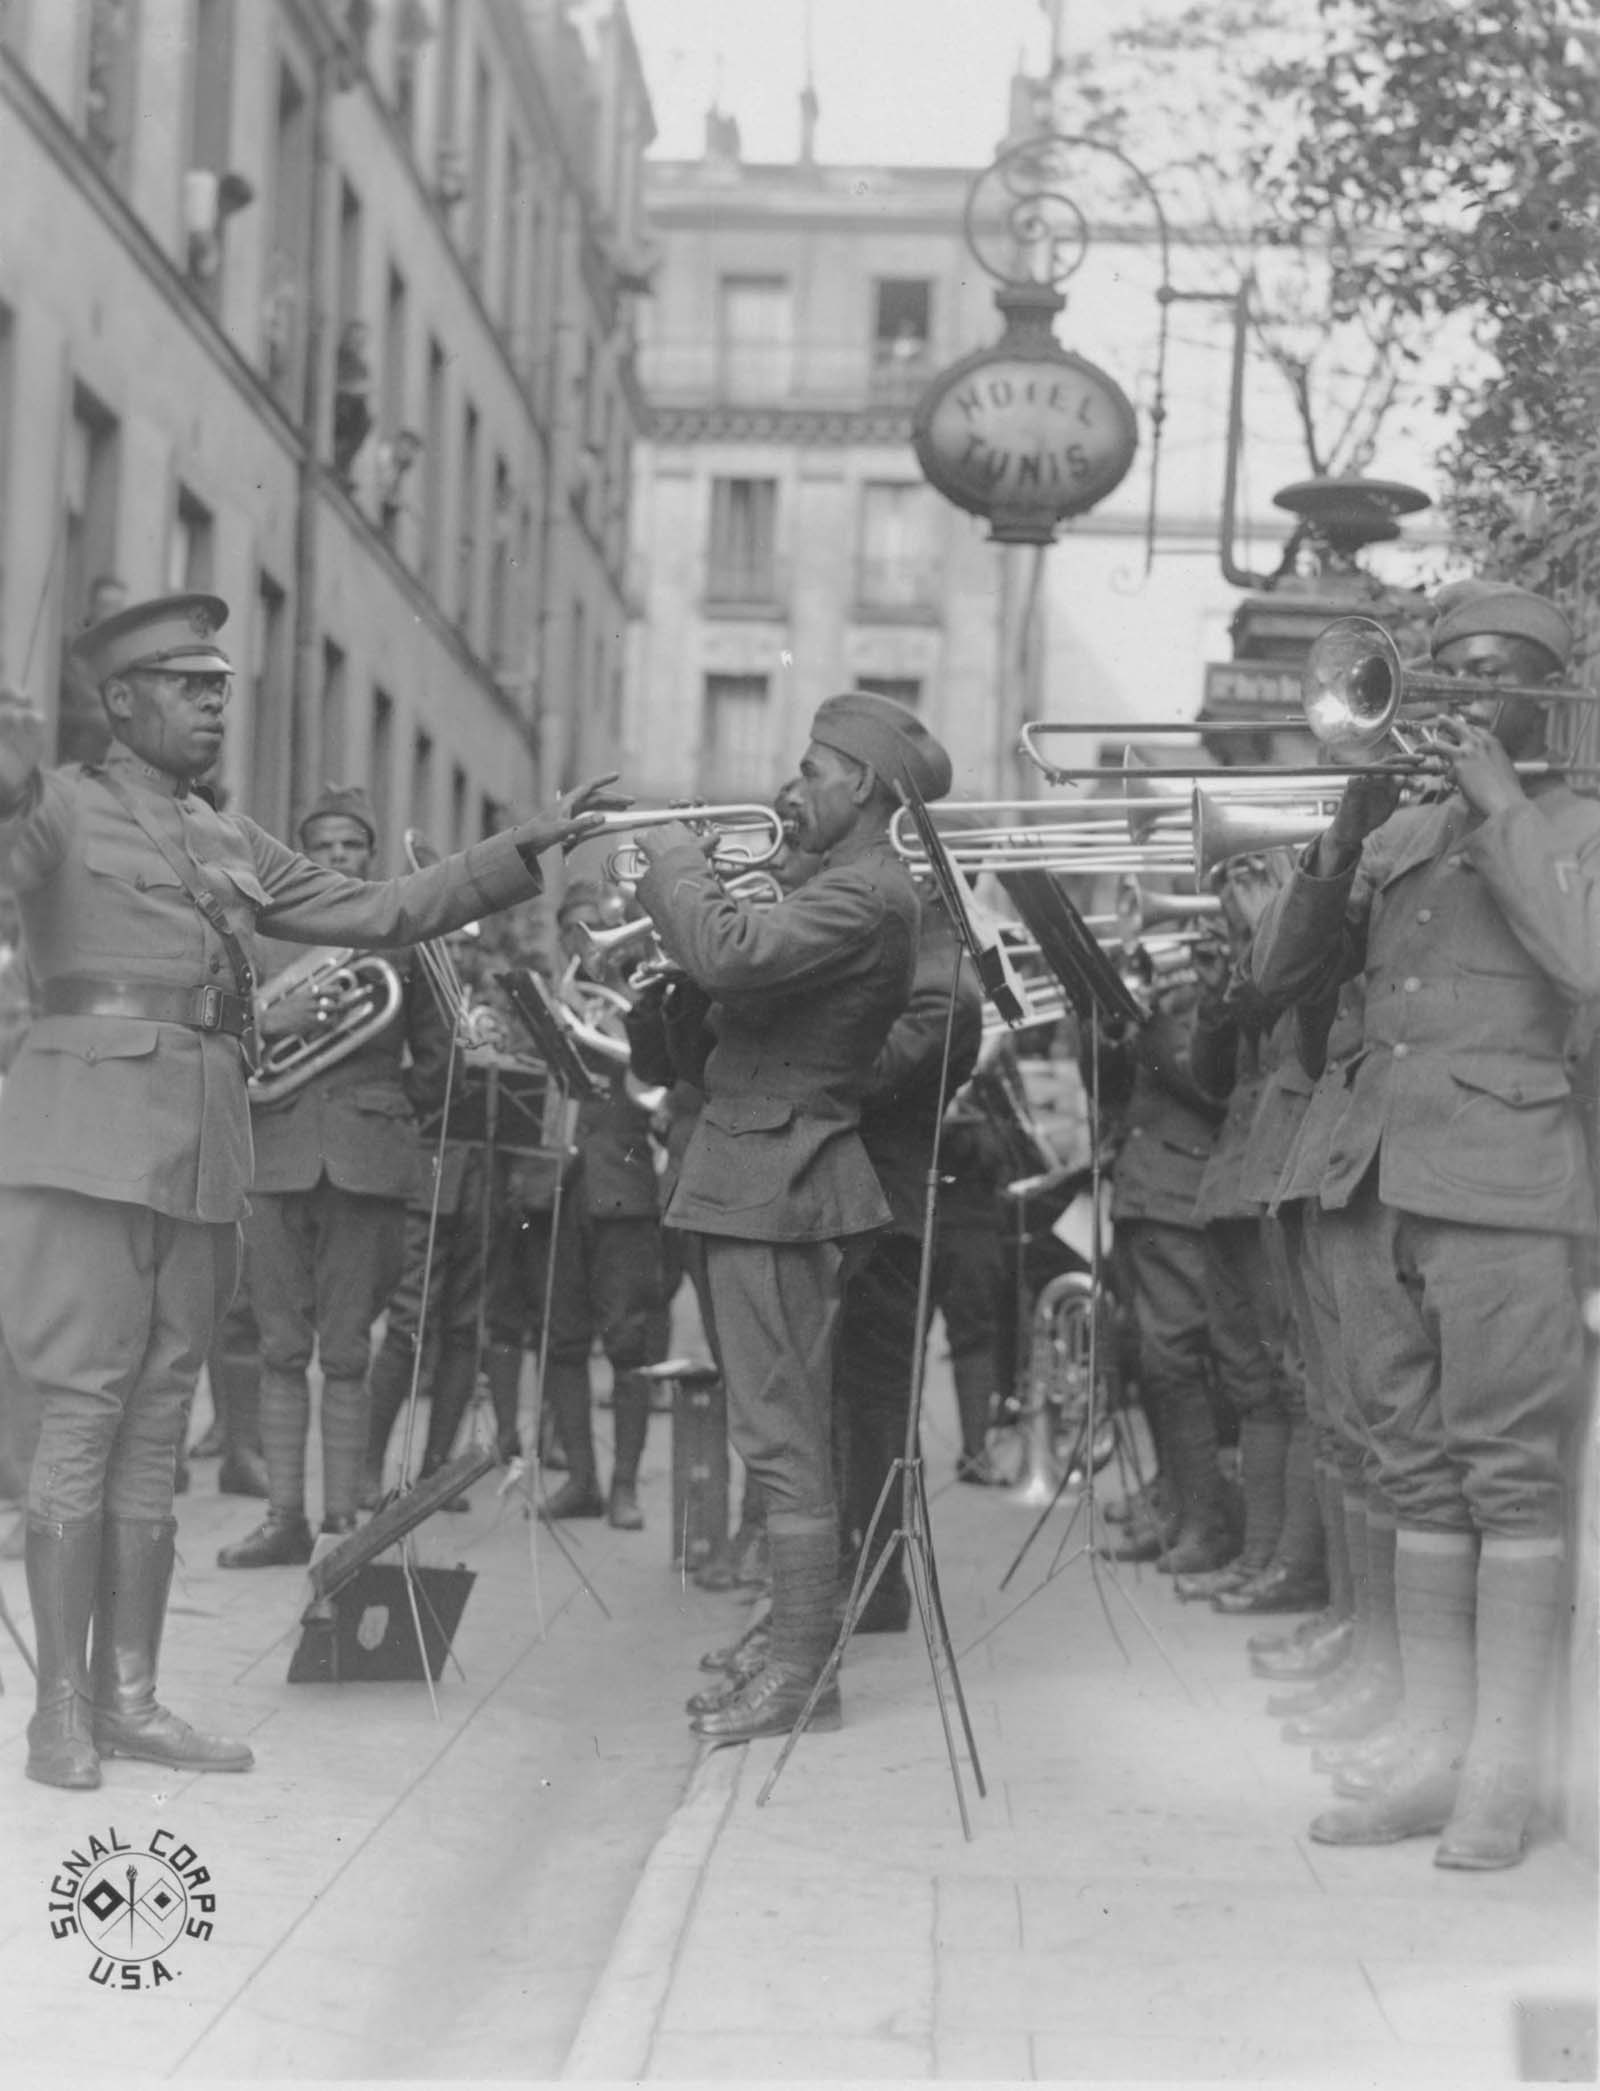 The 369th band played jazz for American wounded in the courtyard of a Paris hospital.